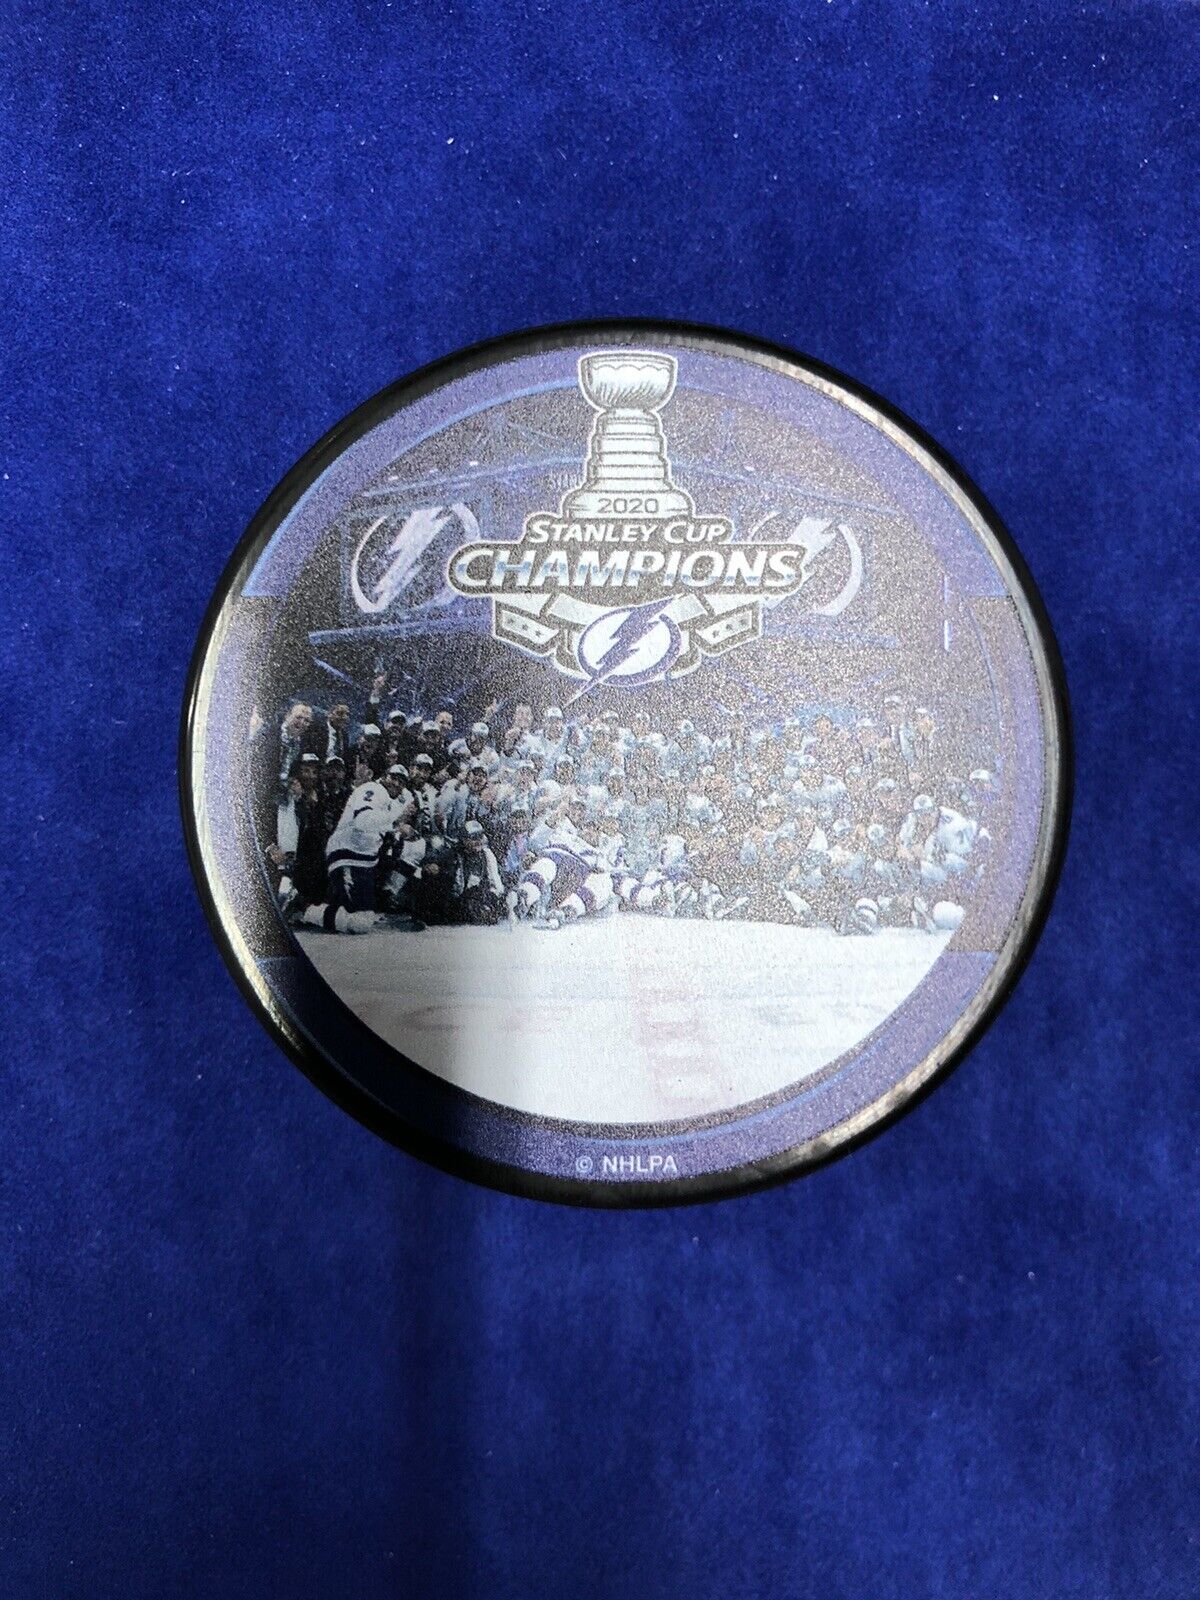 Tampa Bay Lightning 2020 Stanley Cup Champions Team Photo Hockey Puck